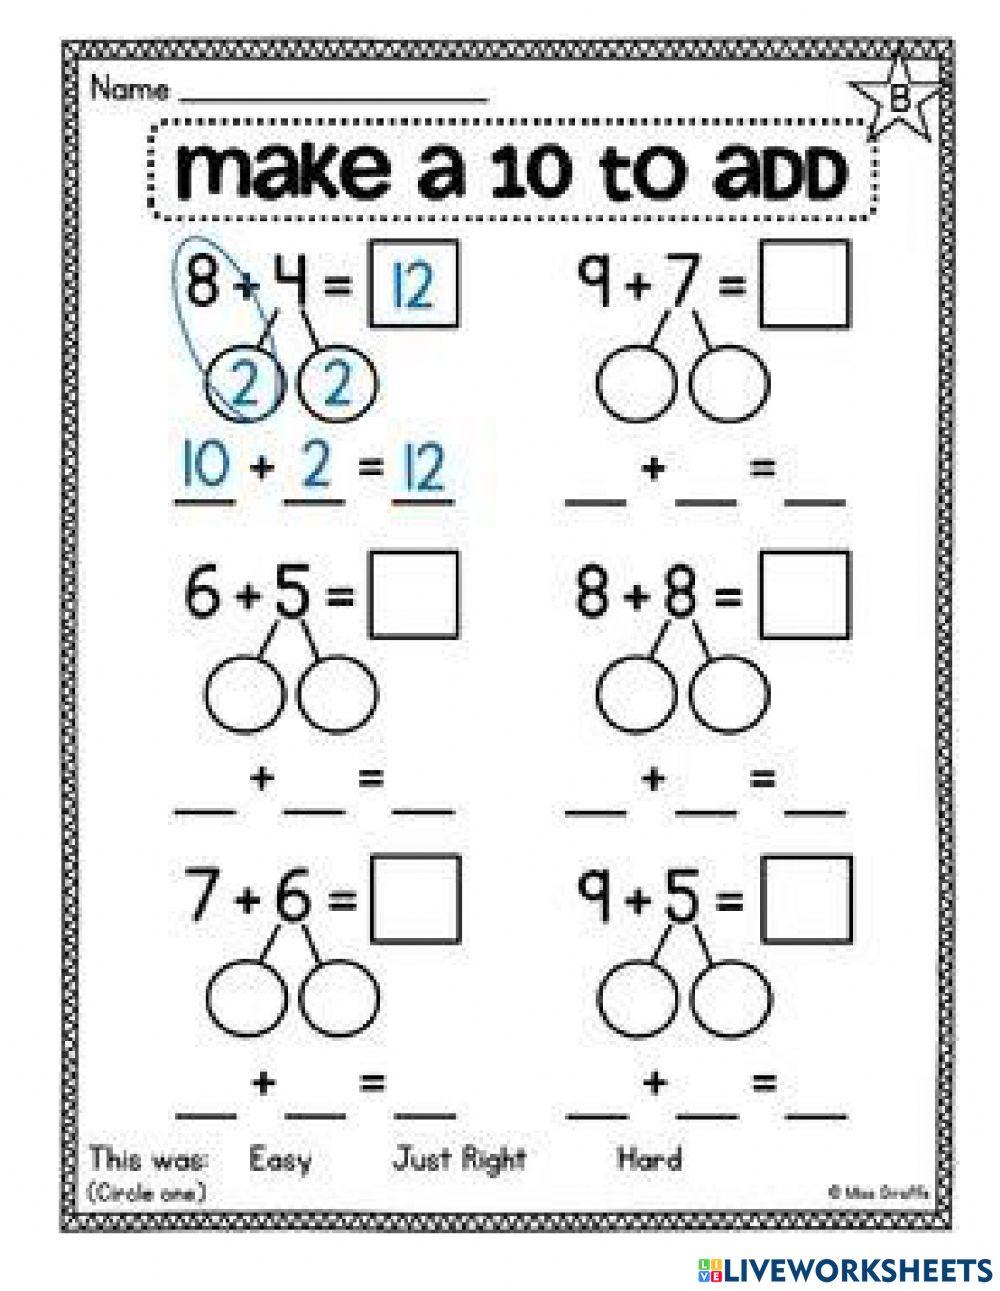 Adding by making 10